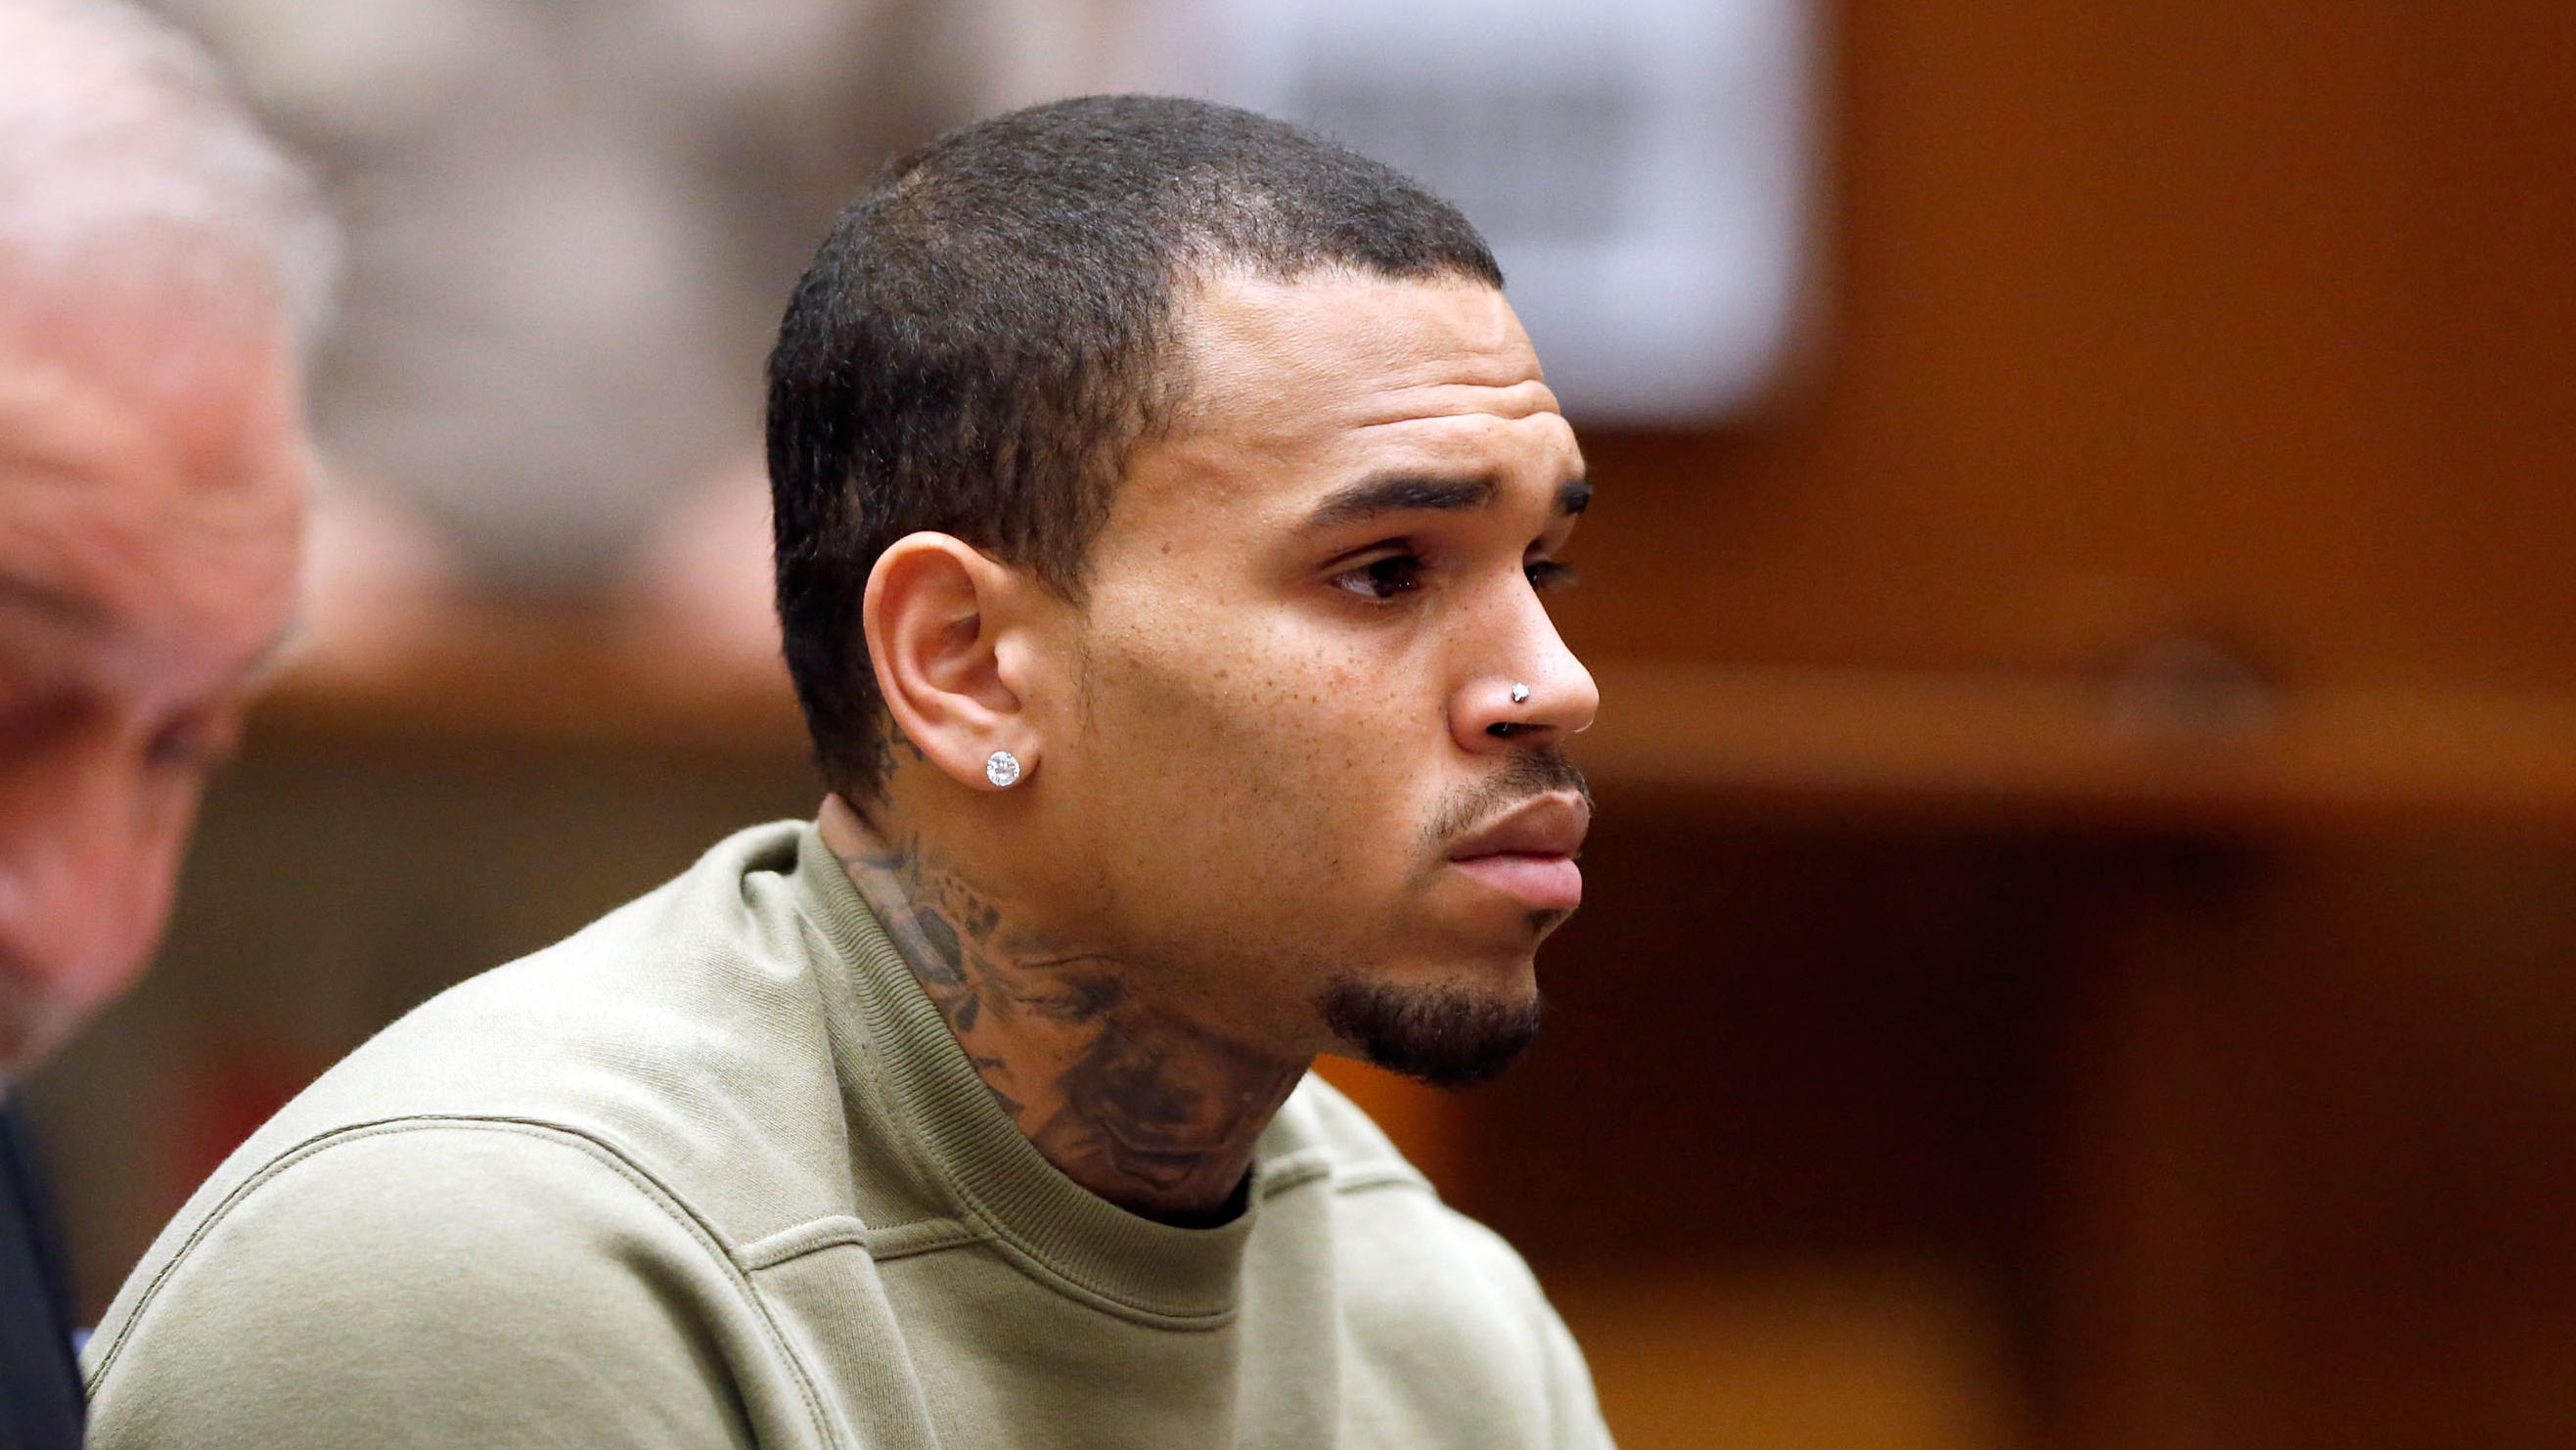 LOS ANGELES, CA - JANUARY 15:  Singer Chris Brown attends a progress hearing at Los Angeles Superior Court on January 15, 2015 in Los Angeles, California.  Brown was first placed on probation after the 2009 domestic violence case in which he plead gu